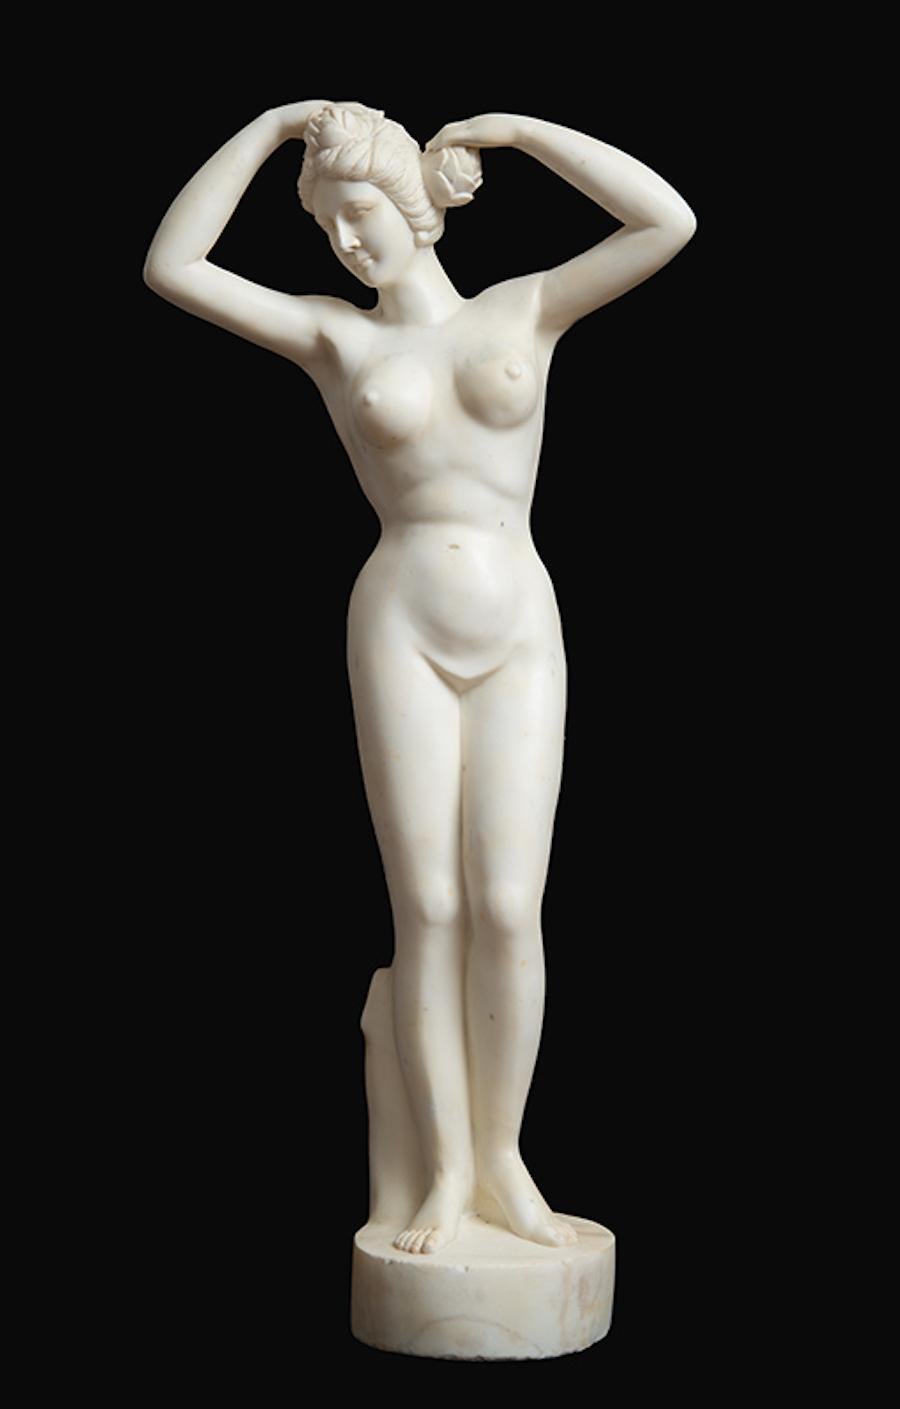 Unknown Figurative Sculpture - Antique sculpture in white statuary marble height 148cm. Rome 19th century.